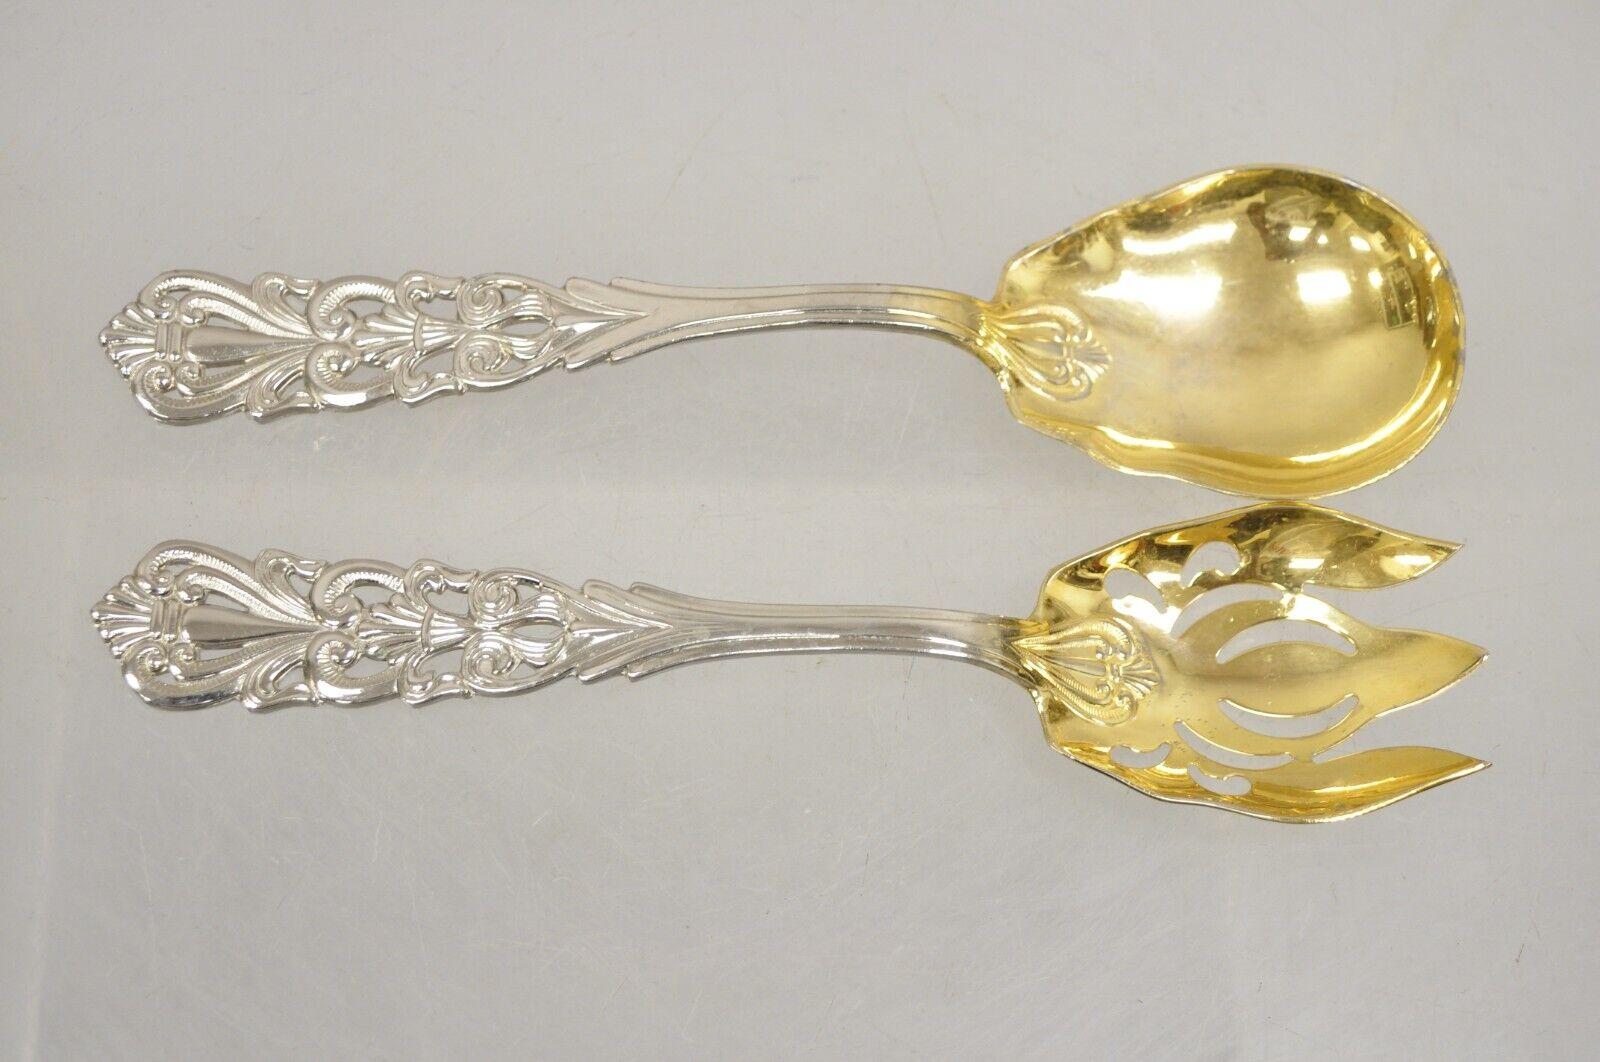 Vintage Italian Baroque Style EPNS Silver & Gold Plated Serving Spoon and Fork Set. Circa Late 20th Century. Measurements:  1